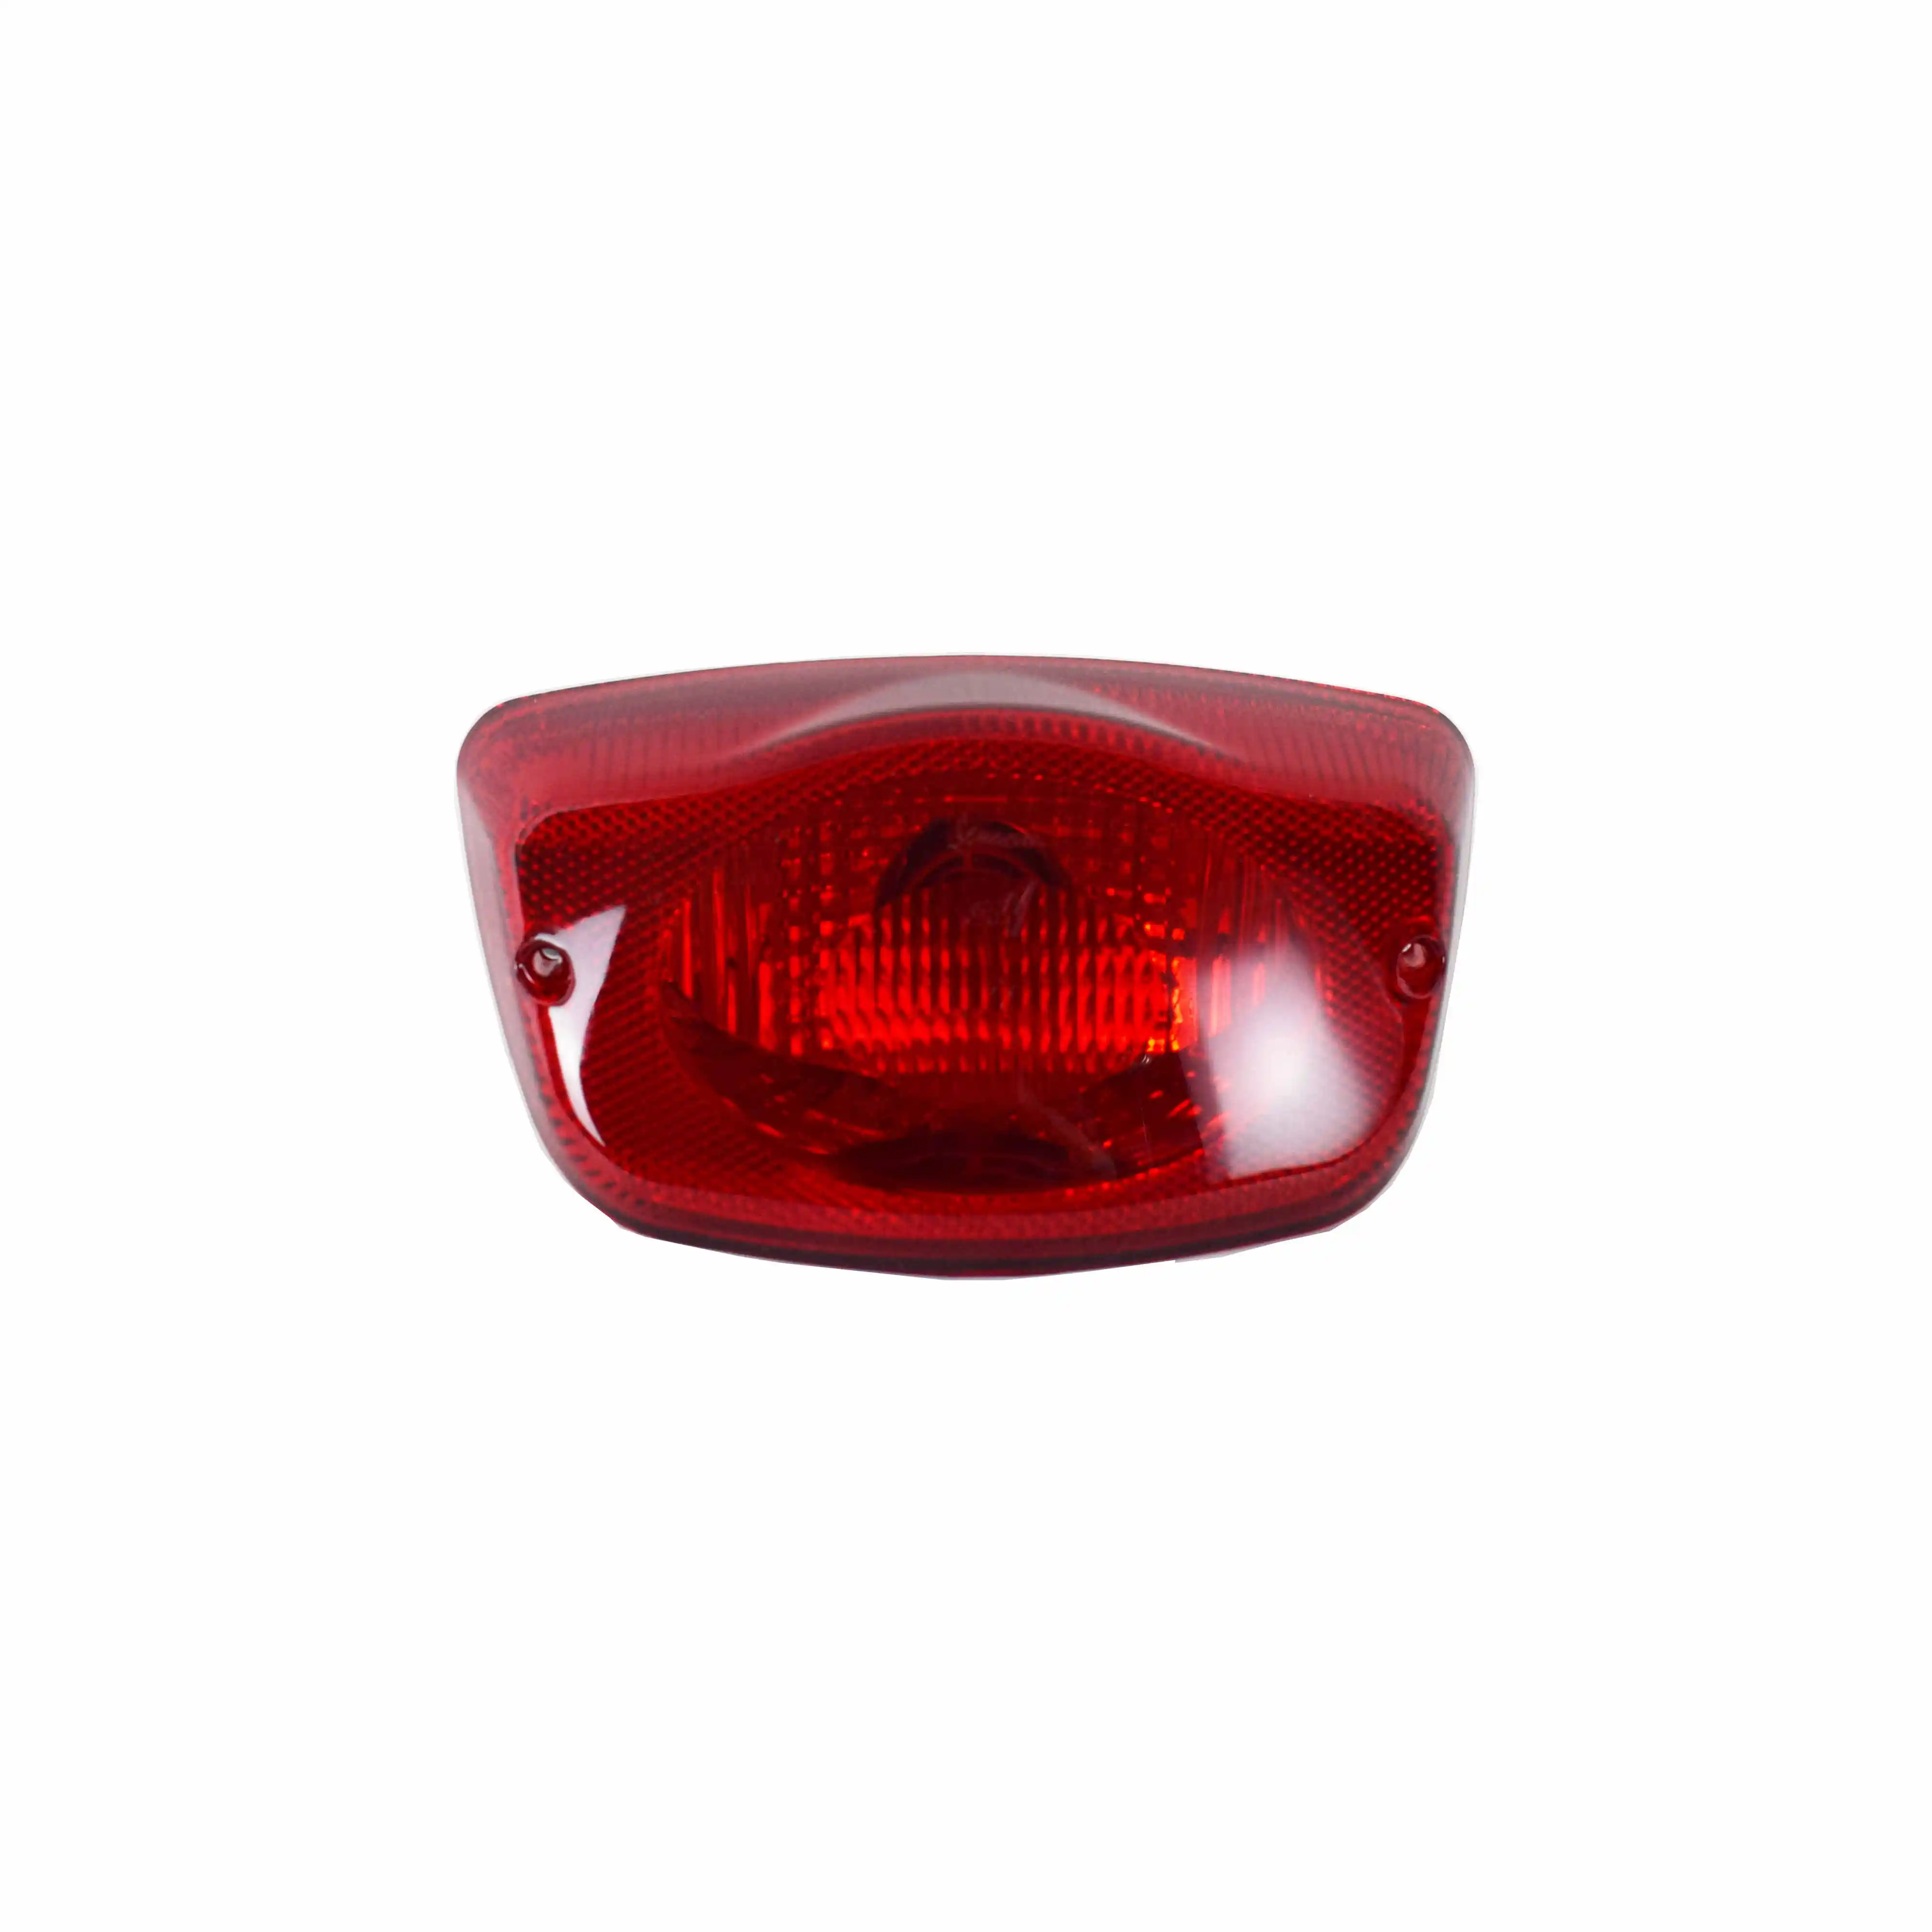 vespa scooter Motorcycle Scooter Tail Light Rear Brake Stop Lights for Piaggio Vespa parts LX 50 125 150 S IE 4T LXV125 LXV150